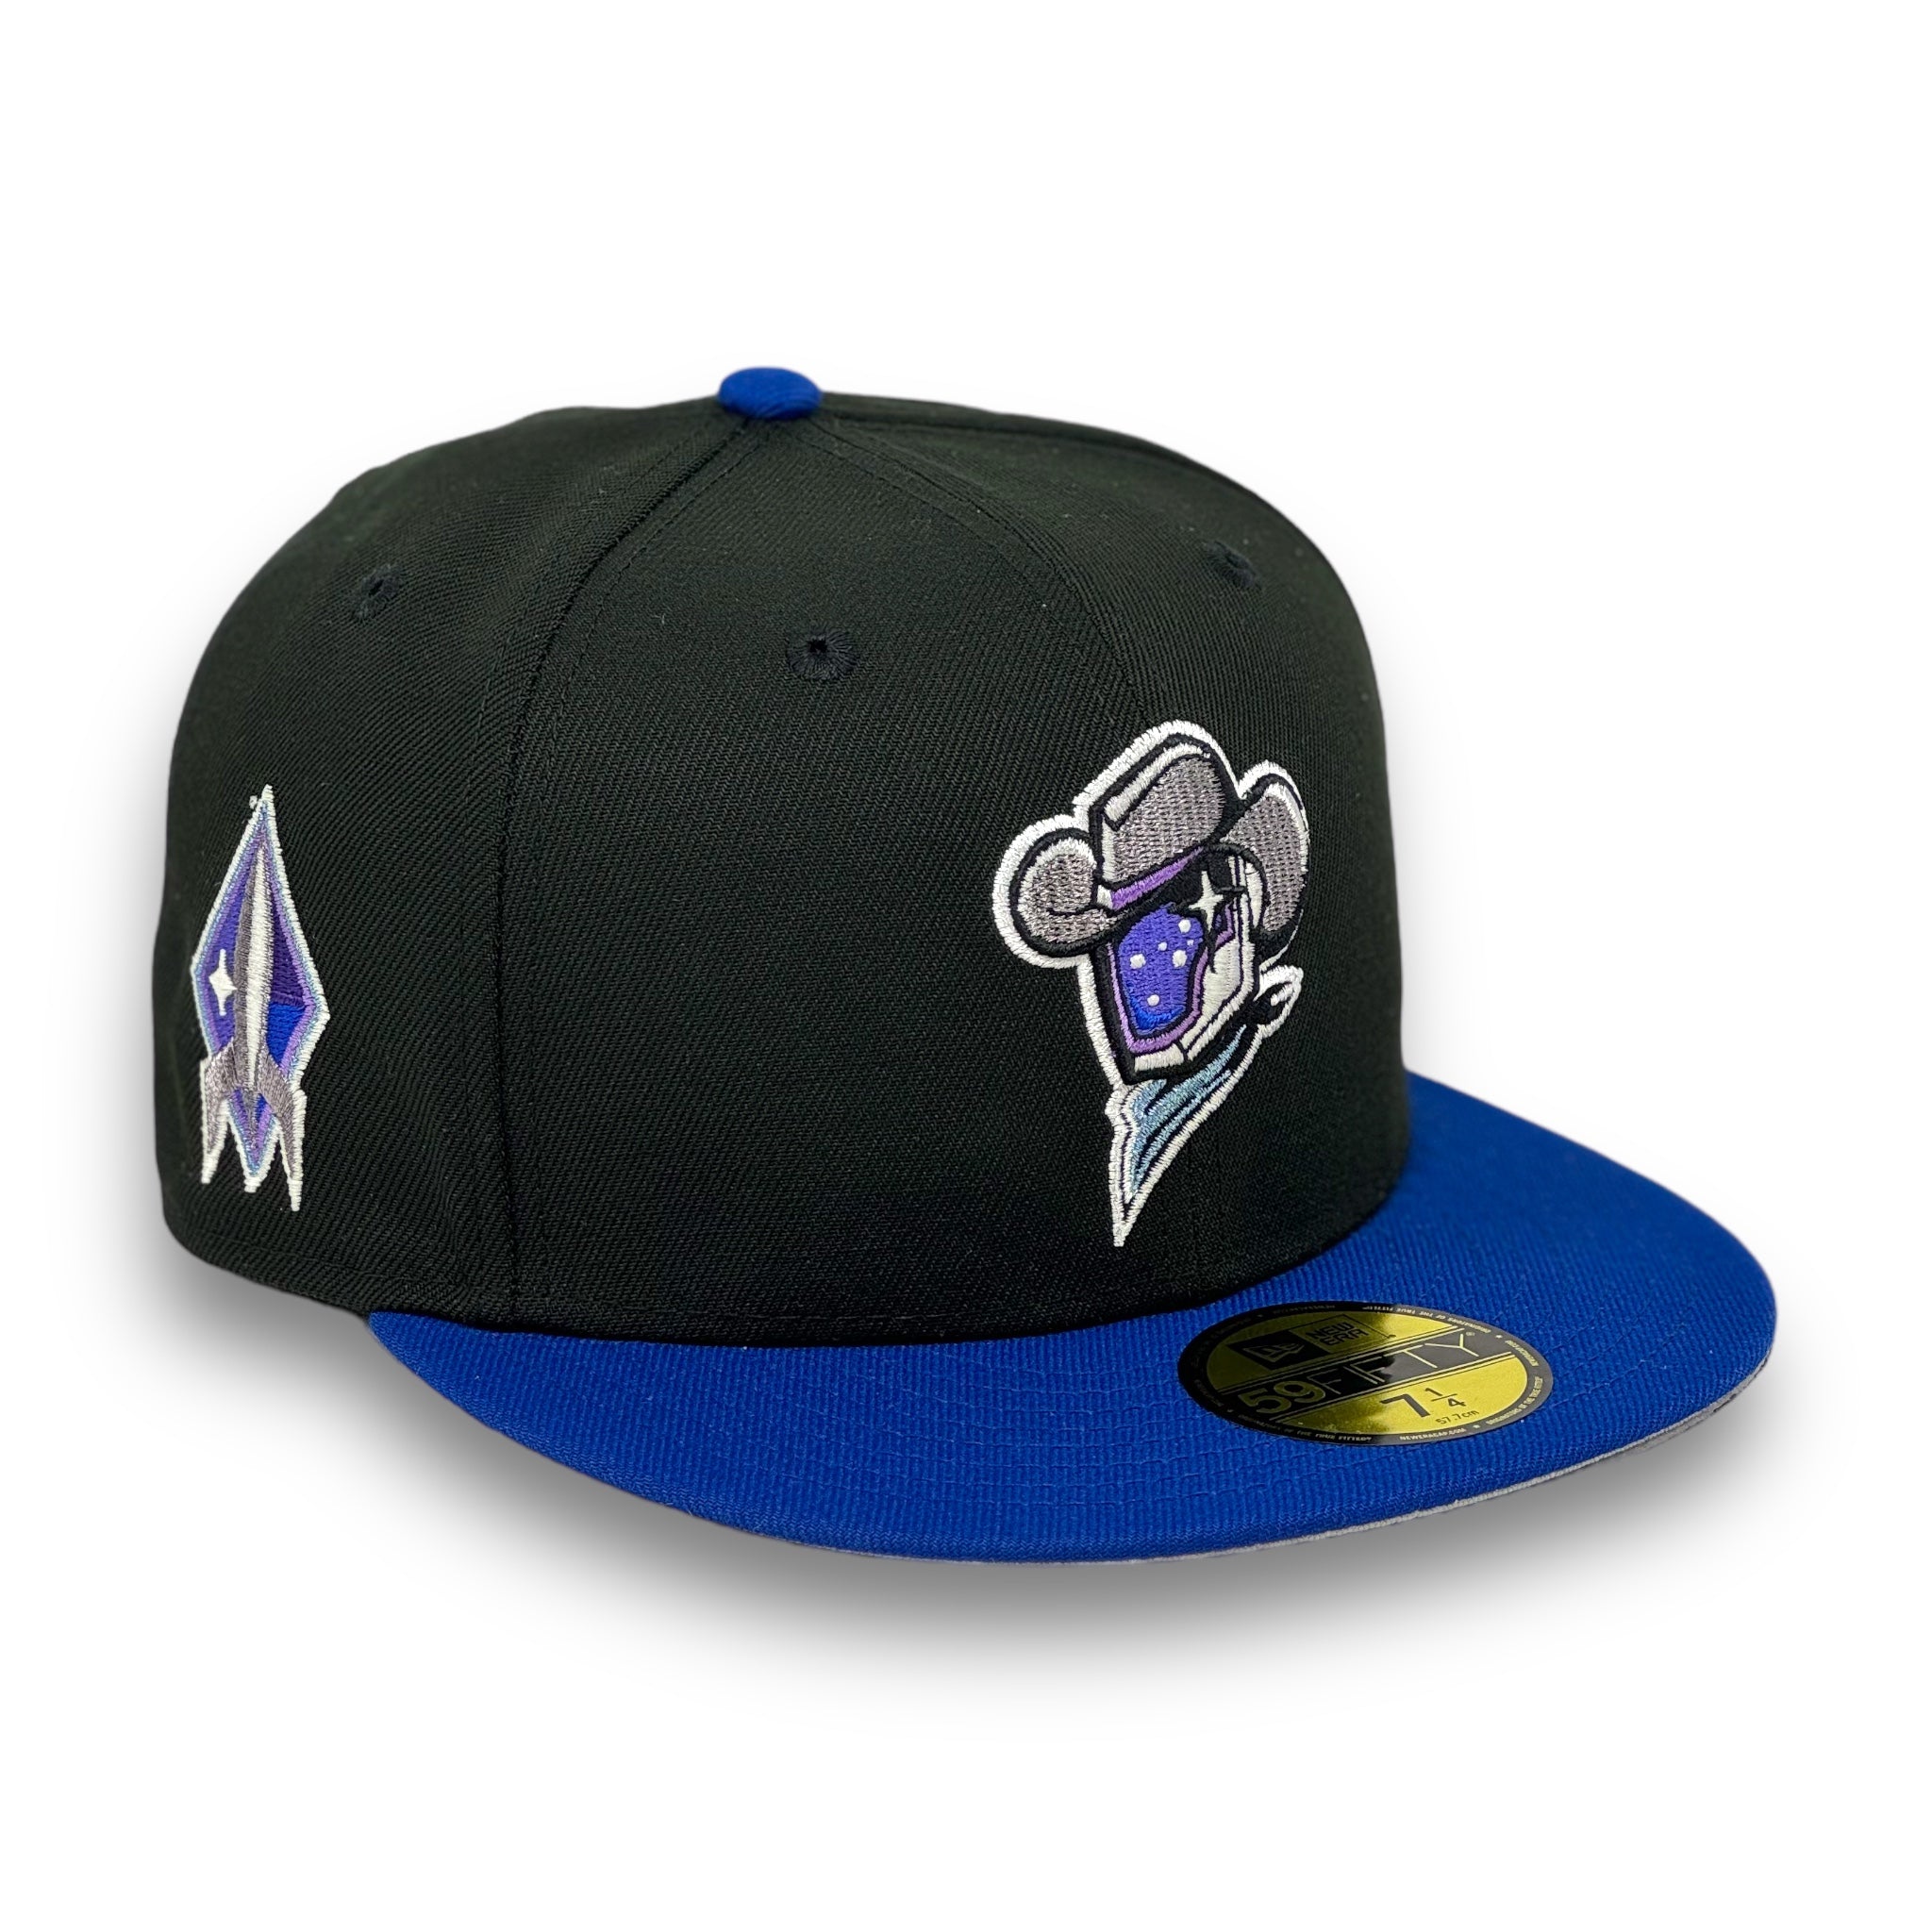 SUGARLAND SPACE COWBOYS NEW ERA 59FIFTY FITTED (GLOW IN THE DARK)